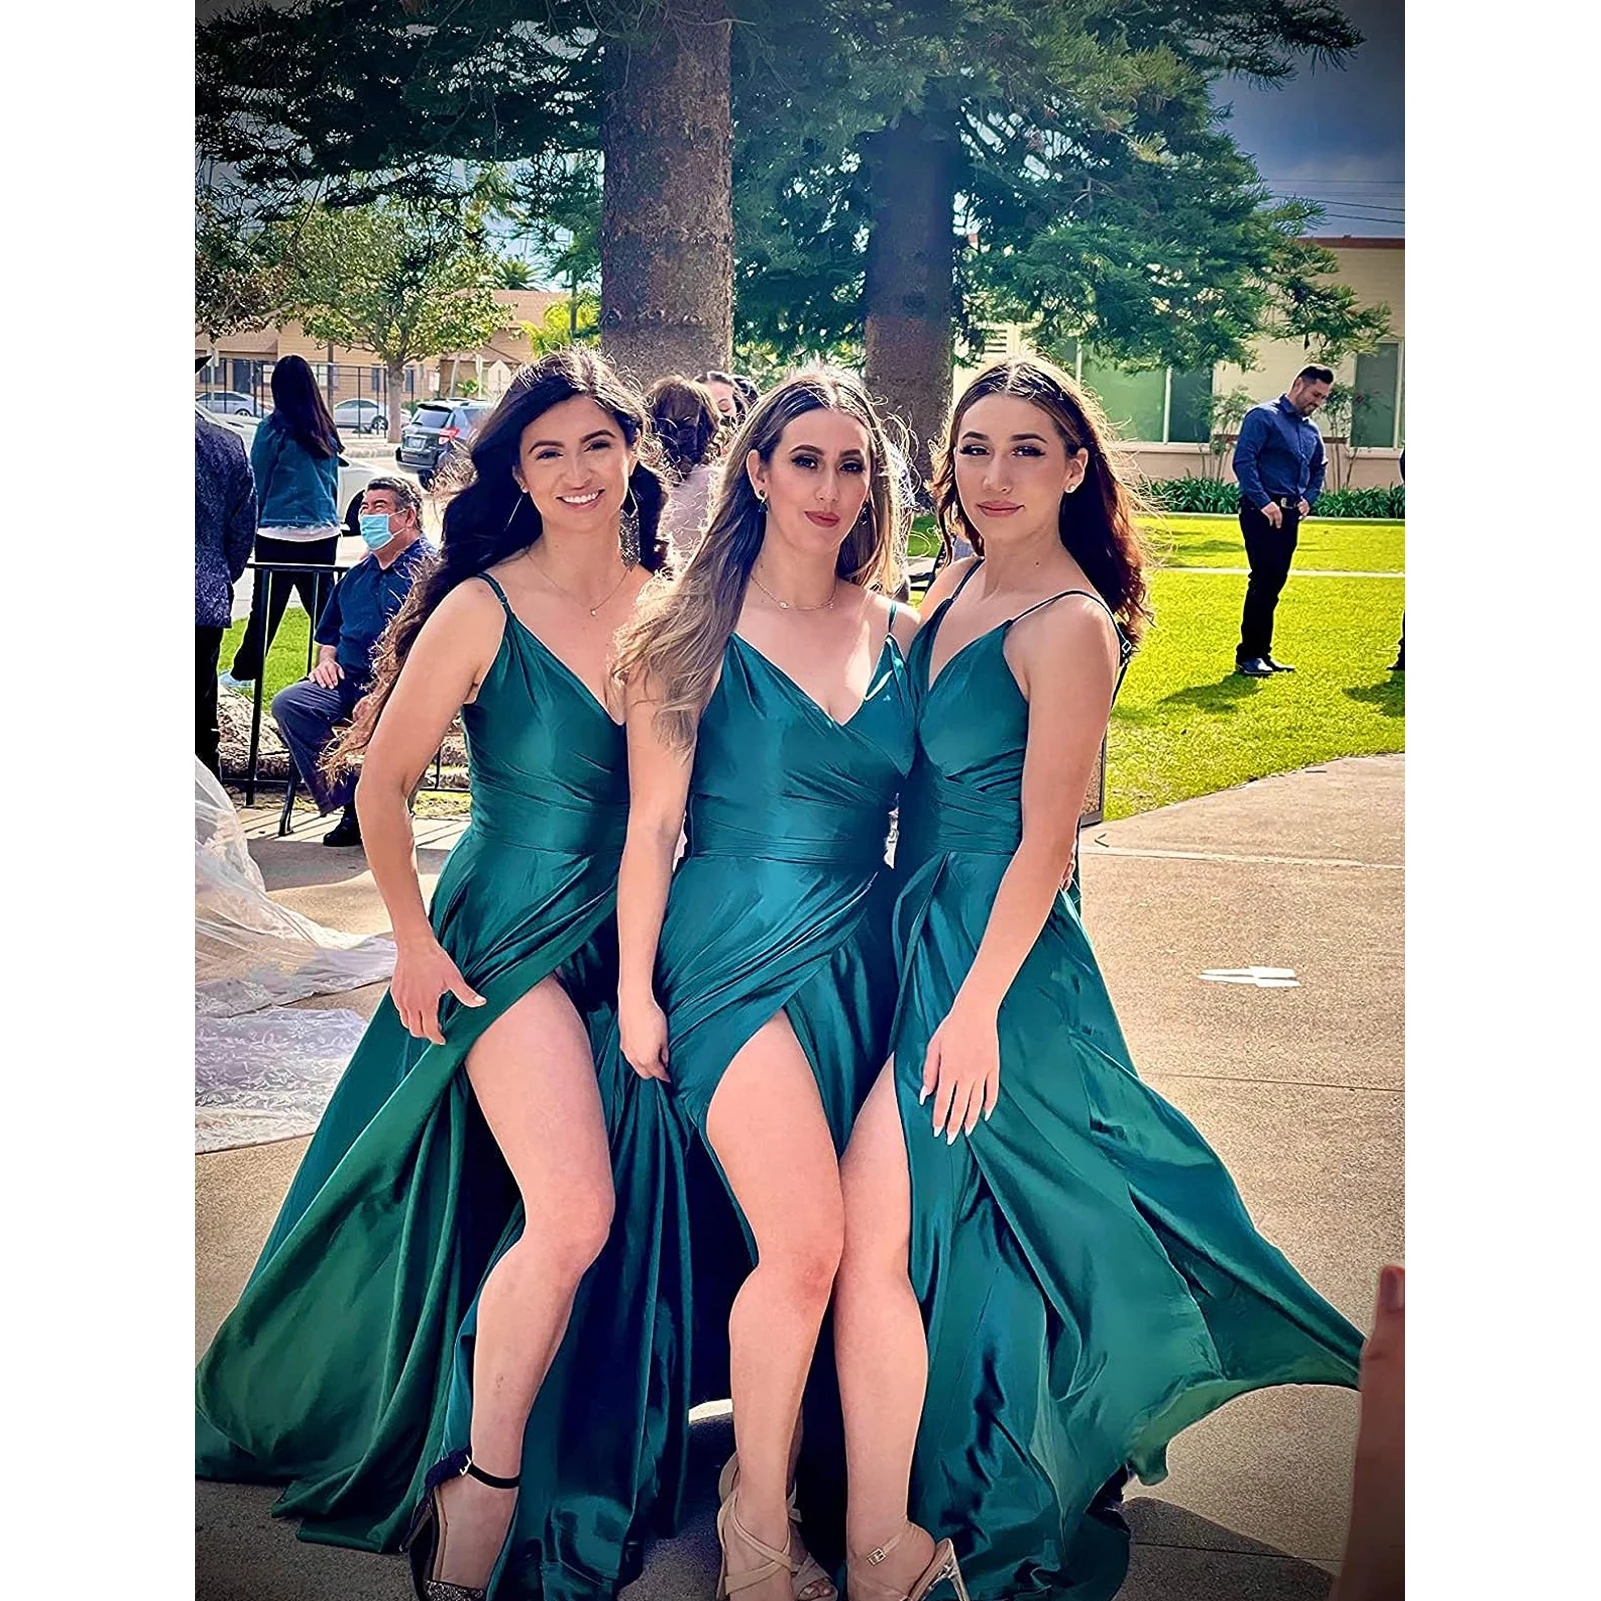 Hunter Green A Line Long Bridesmaid Dresses Spaghetti Straps Charming Maid Of Honor Gowns Sexy Split Floor Length Plus Size Women Wedding Guest Party Dress CL3377